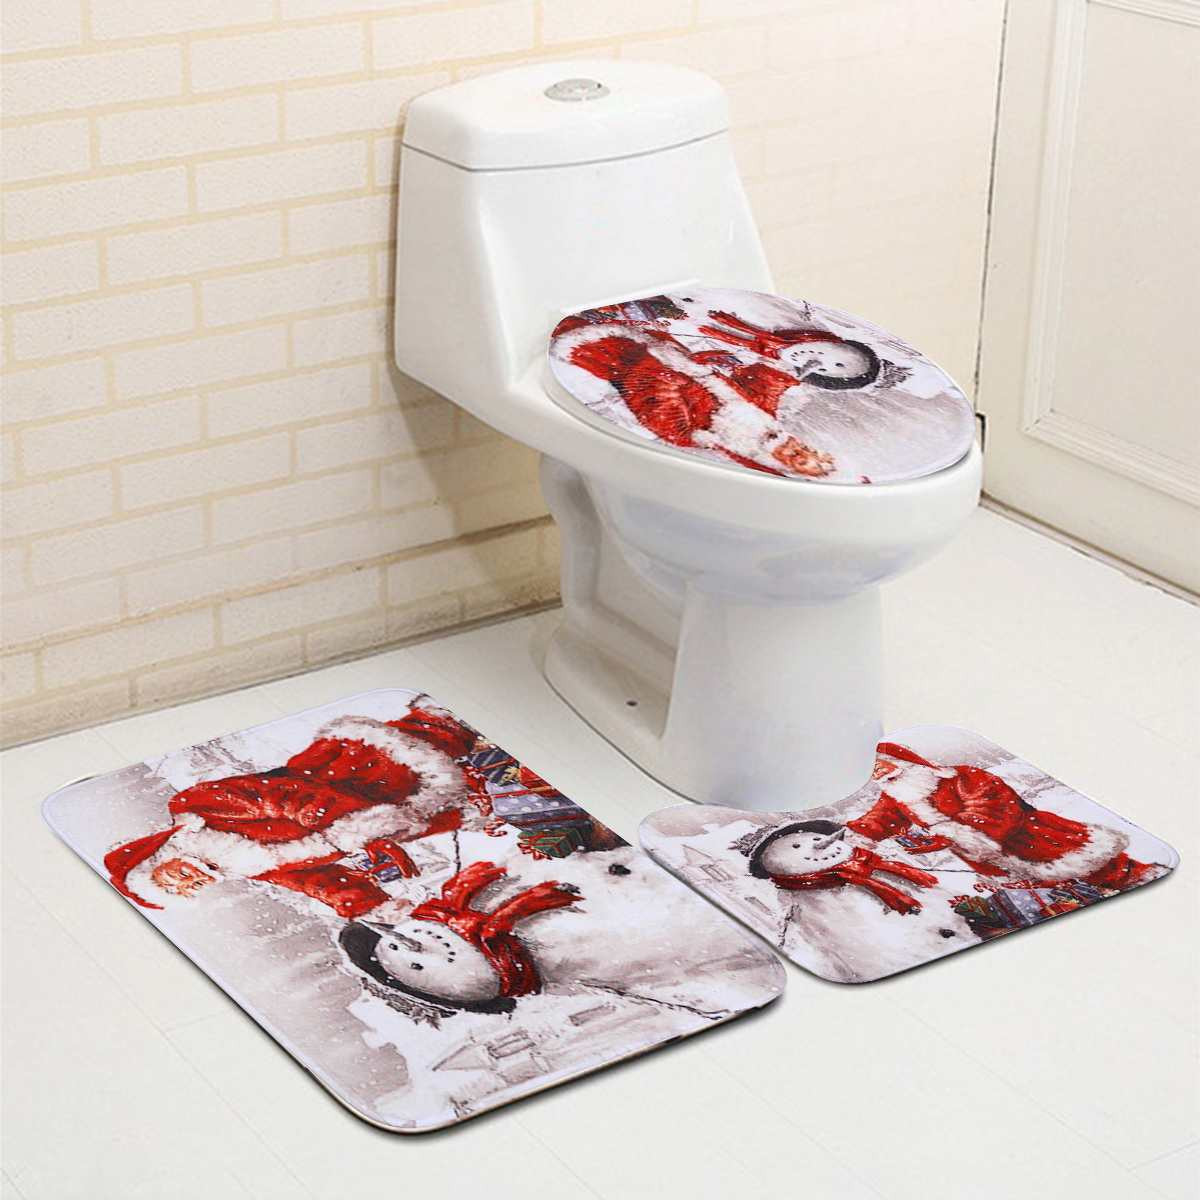 Christmas Toilet Seat Cover
 Aliexpress Buy Printed Cartoon Christmas Toilet Seat